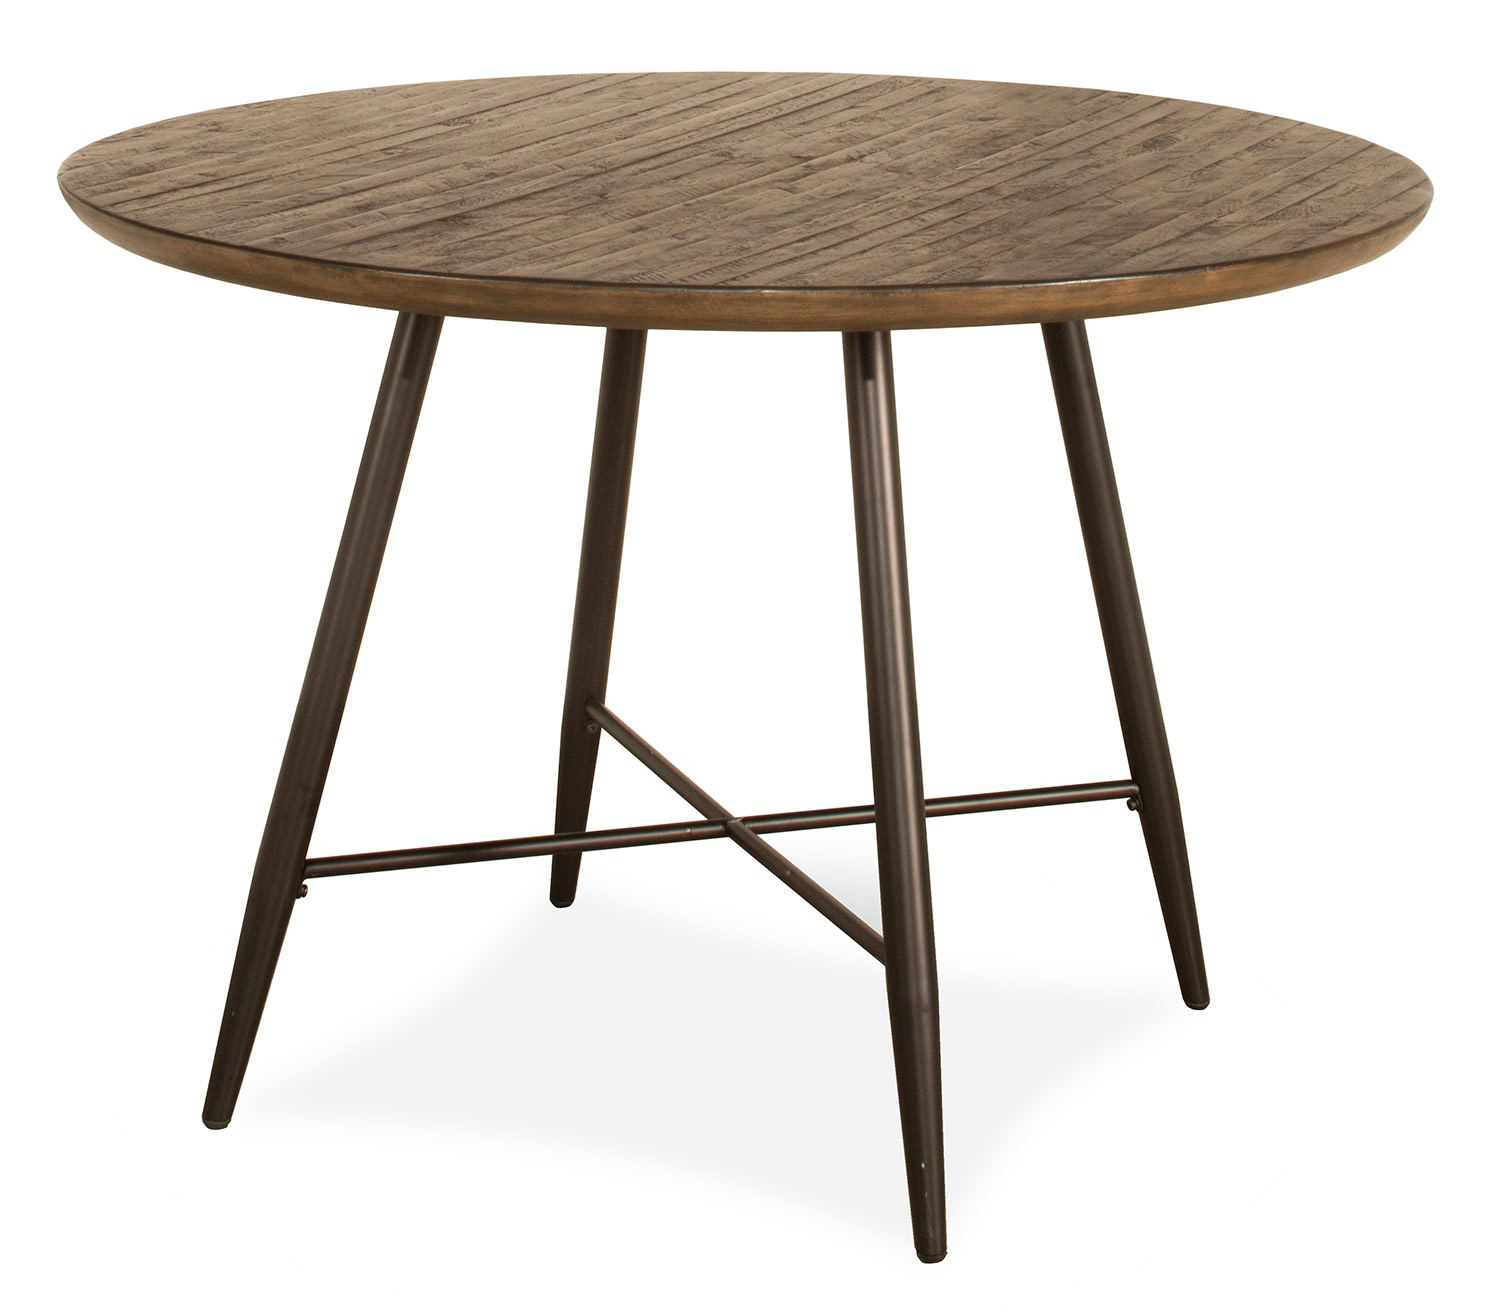 Hillsdale Forest Hill Dining Table - Brown